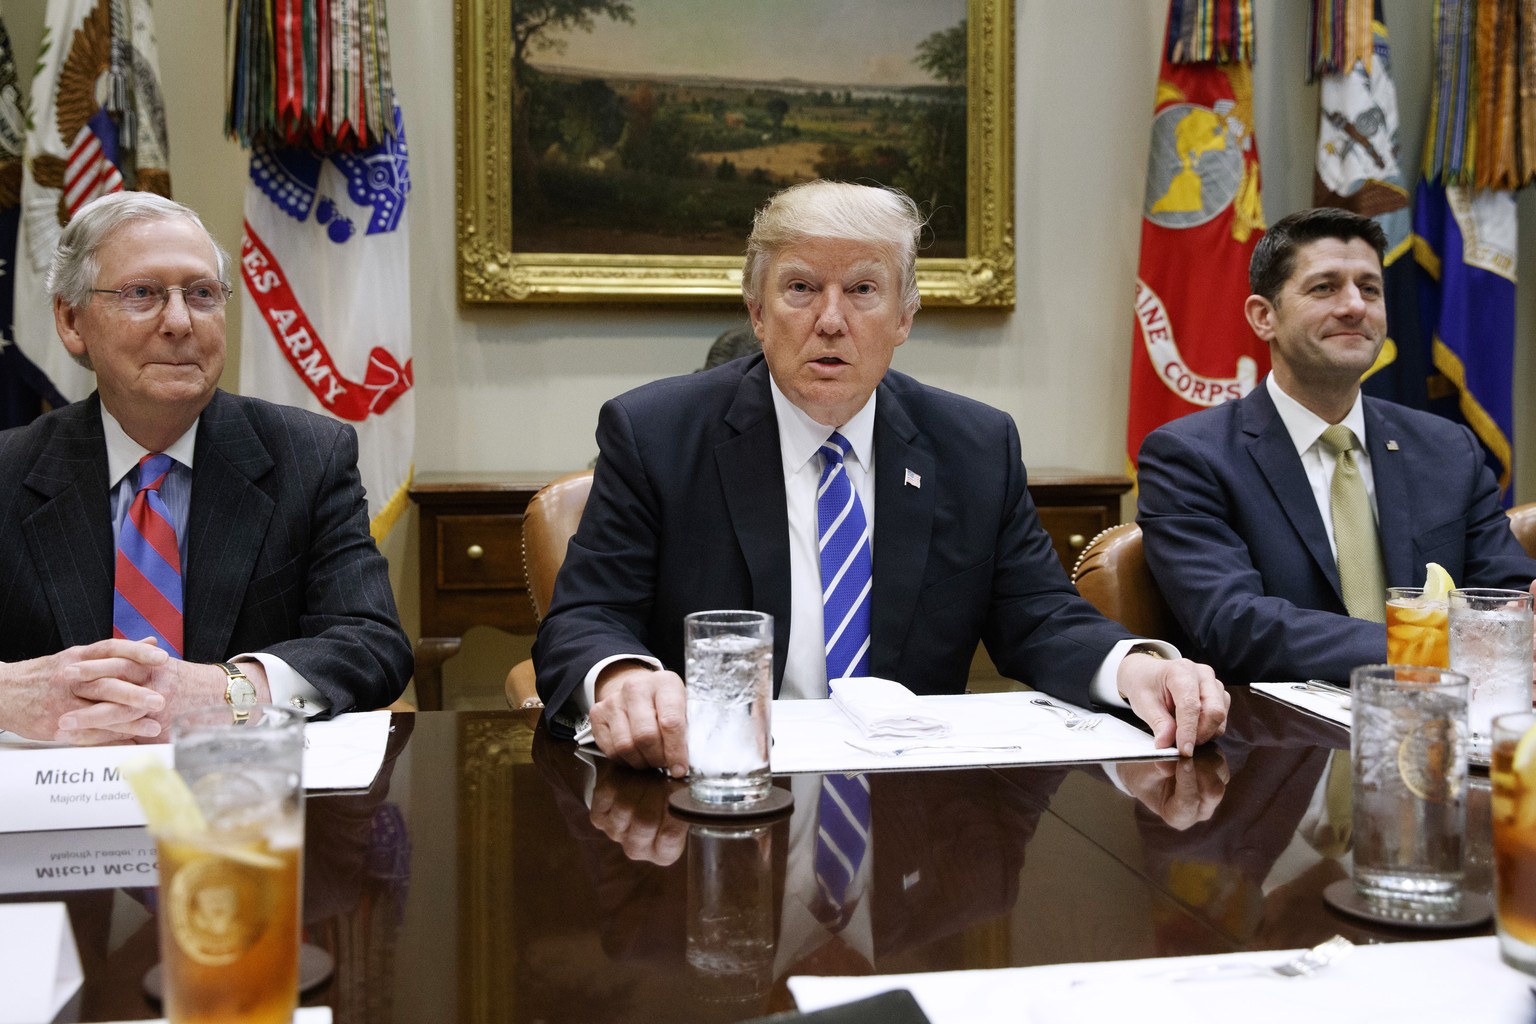 President Donald Trump, flanked by Senate Majority Leader Mitch McConnell of Ky. and House Speaker Paul Ryan of Wis., hosts a meeting with House and Senate leadership, Wednesday, March 1, 2017, in the ...